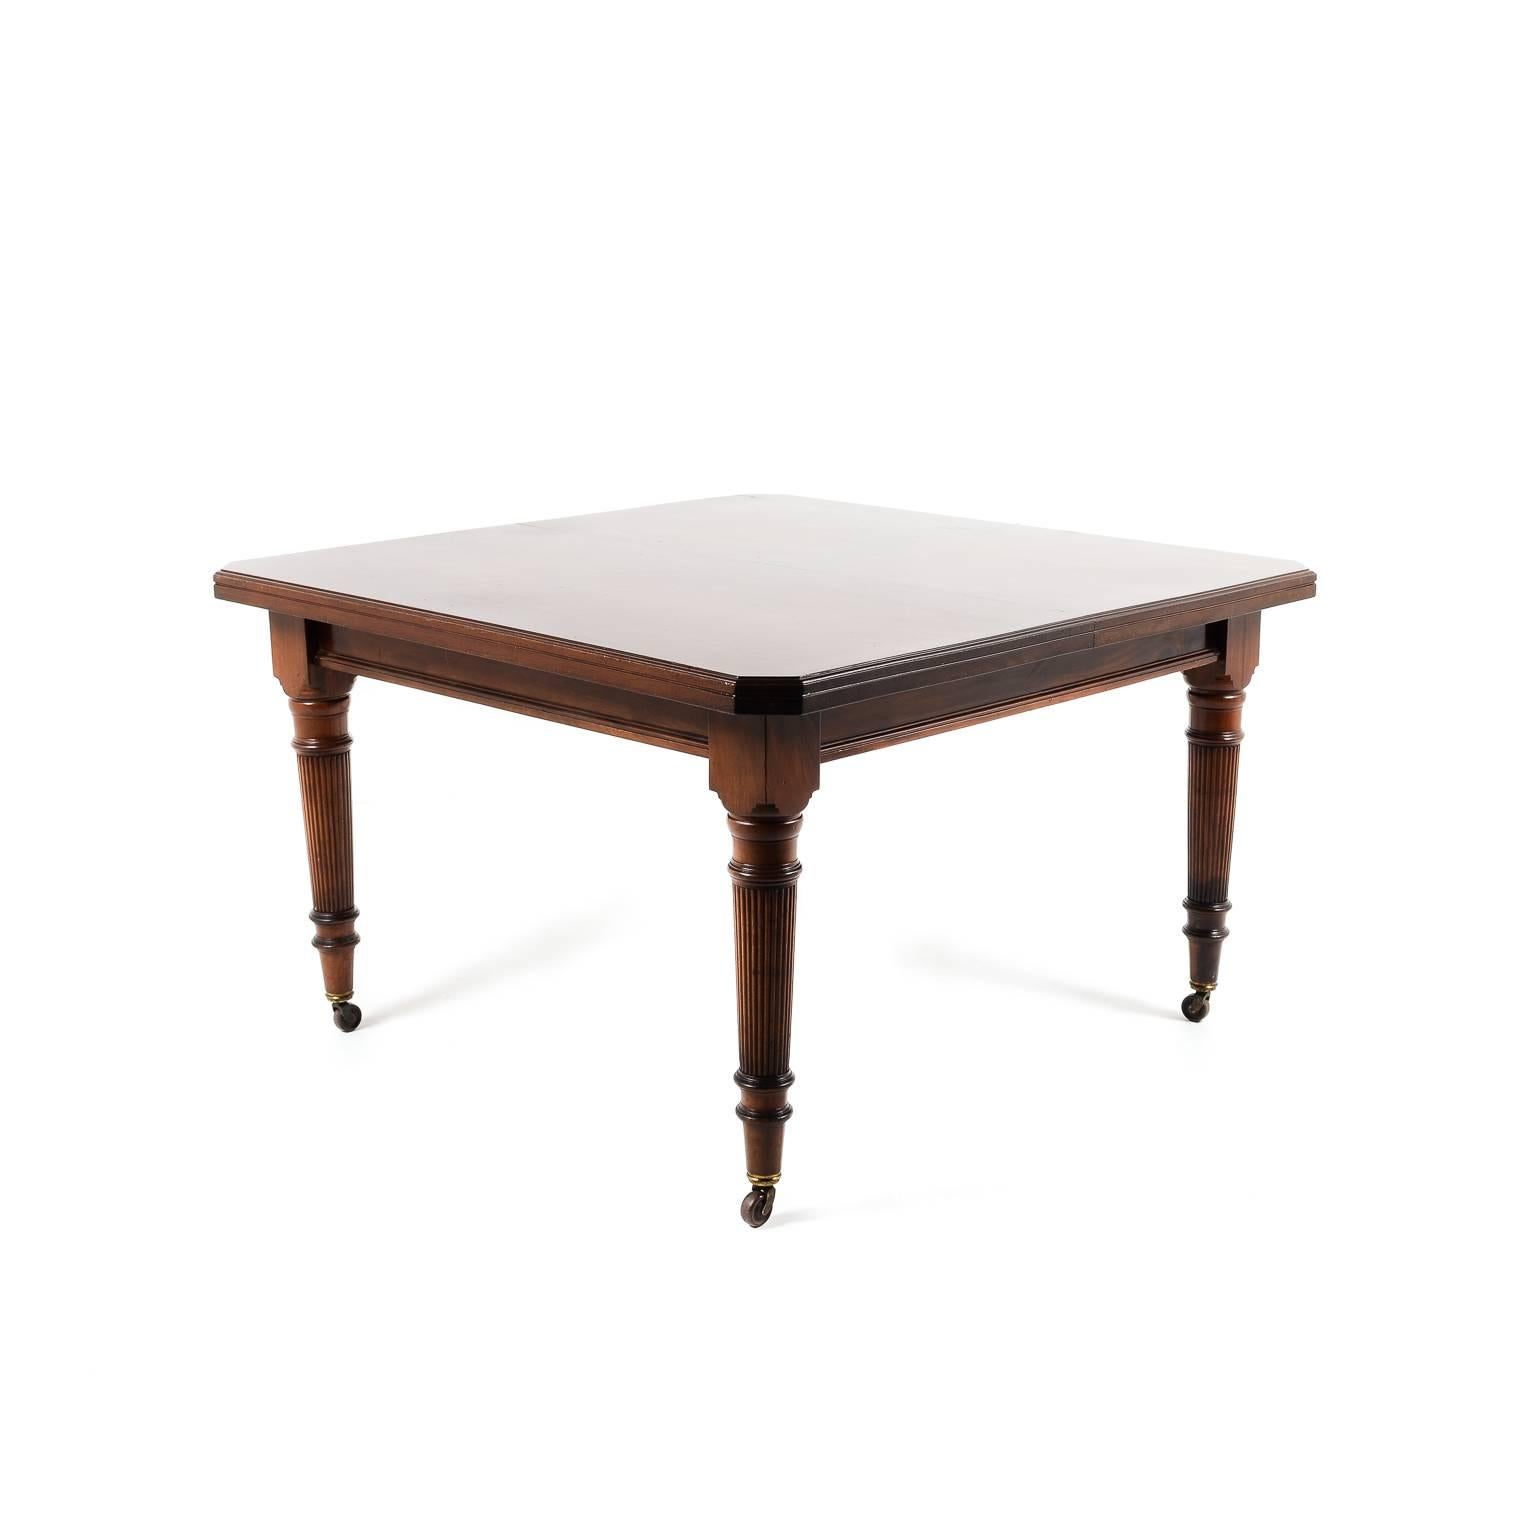 Antique, top quality, solid mahogany English table. Signed ‘Maple & Co’, circa 1900. One leaf, original casters.

Maple & Co was one the largest and most successful British furniture retailers and cabinet makers in the Victorian and Edwardian